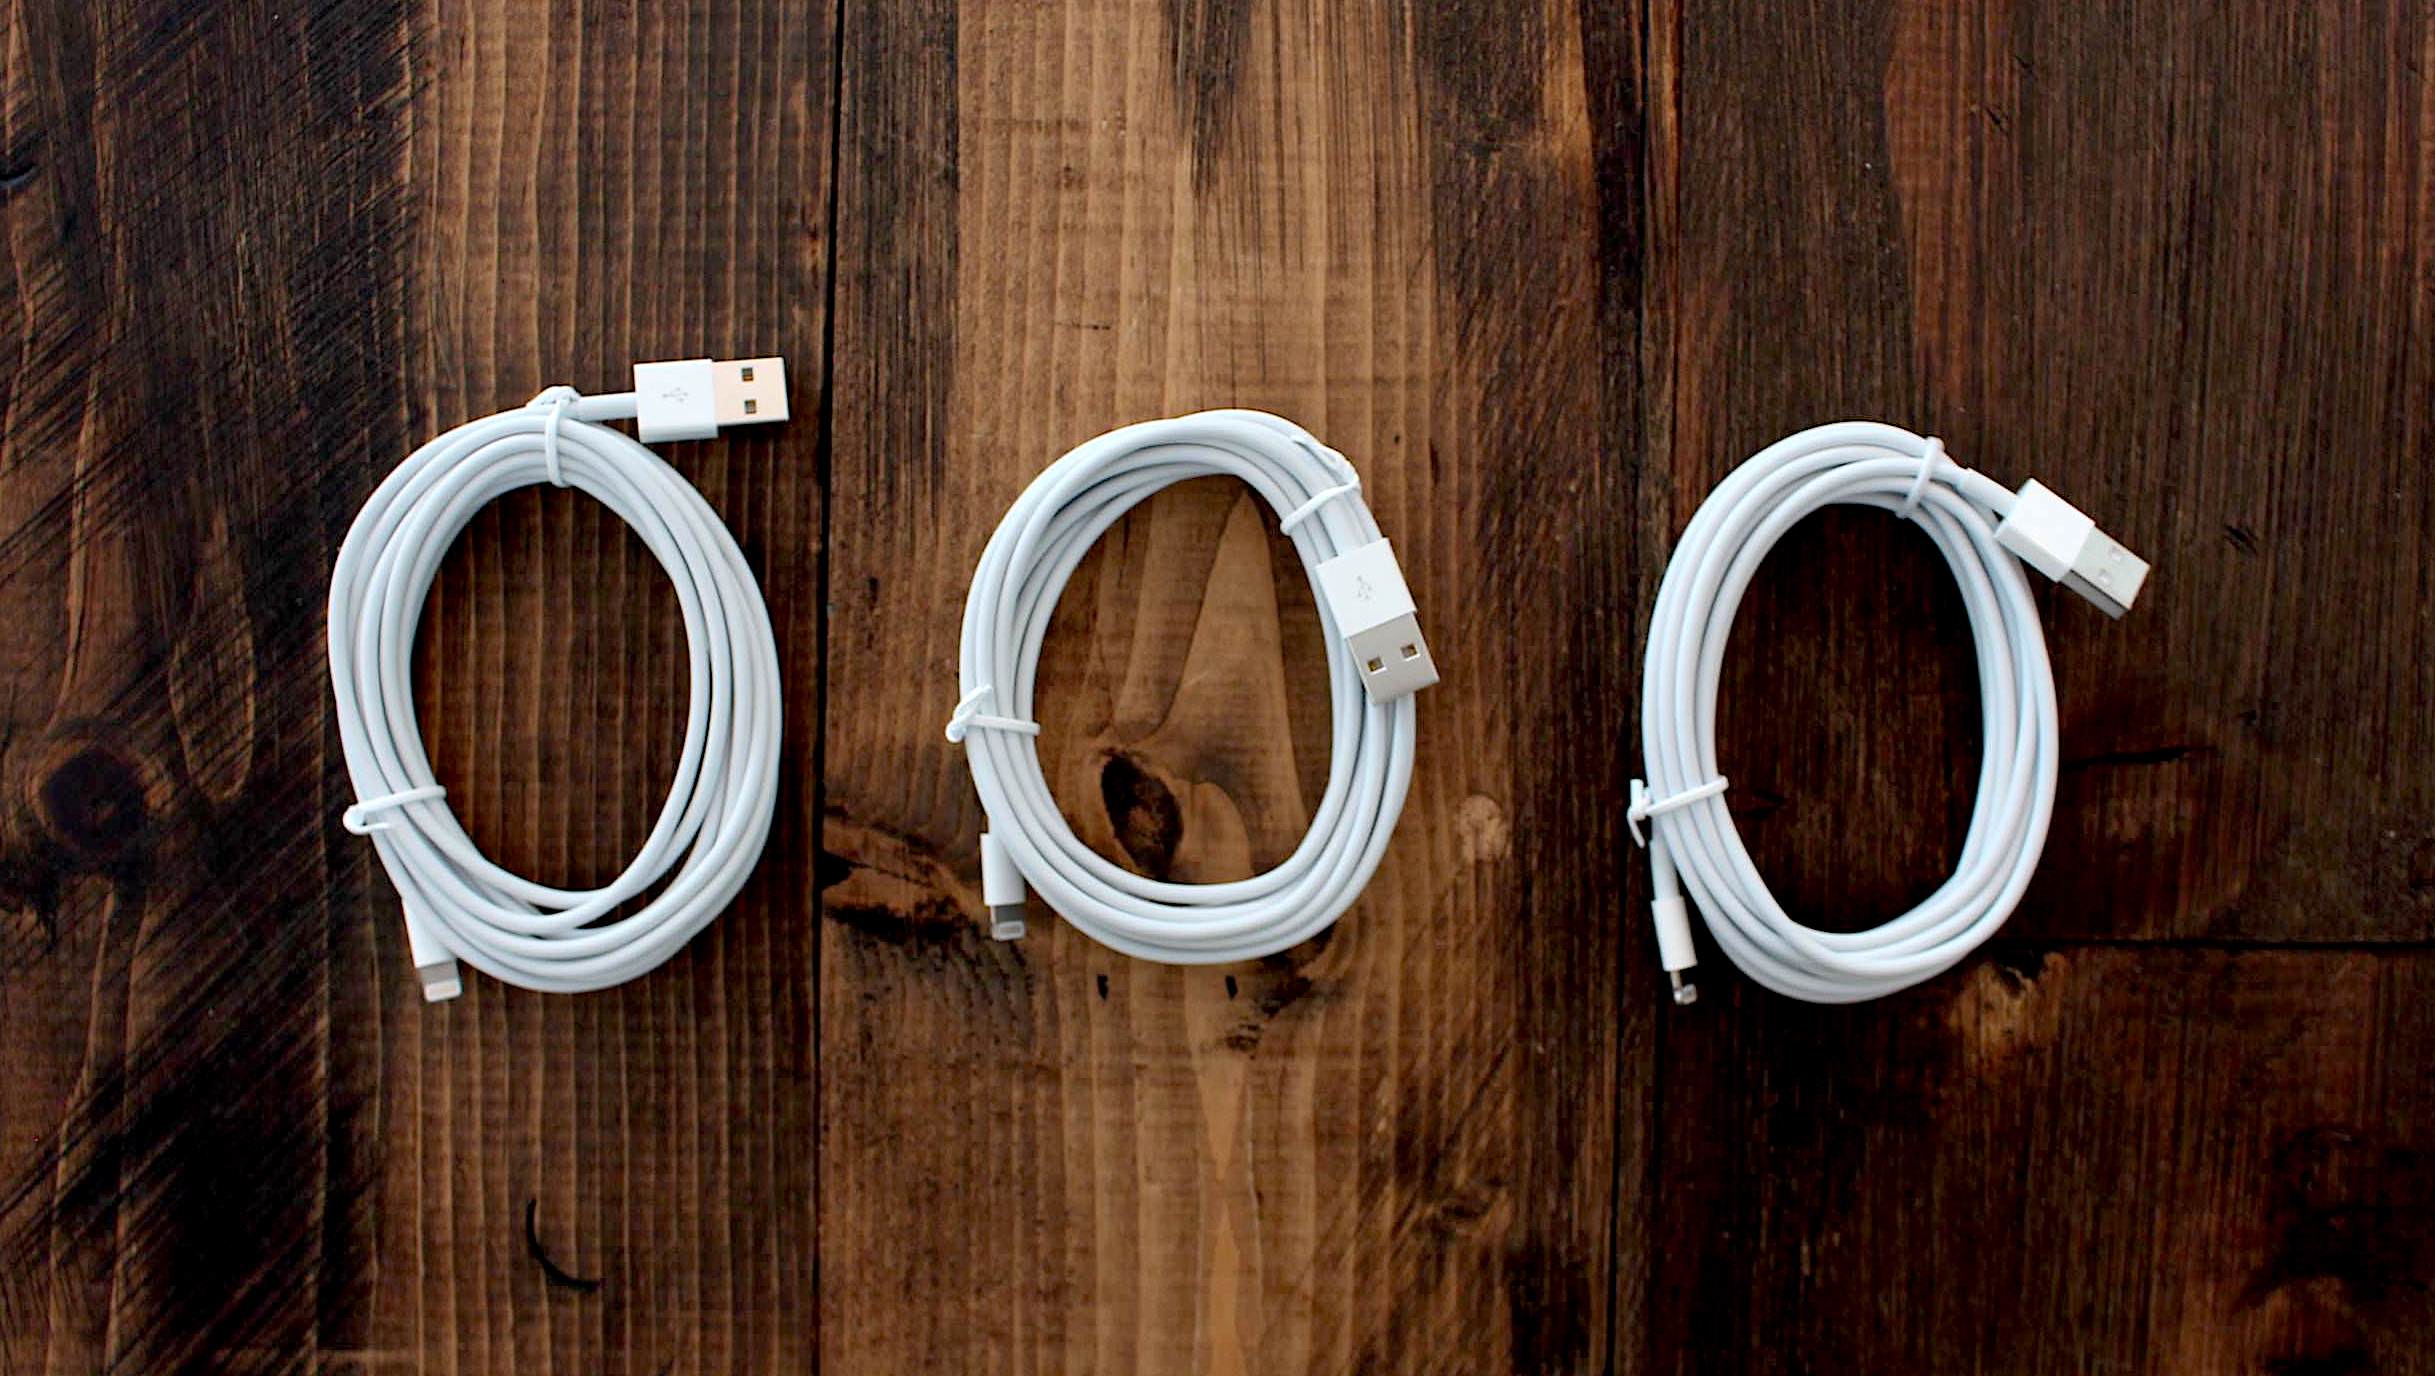 10 Ft Lightning Cable Review7